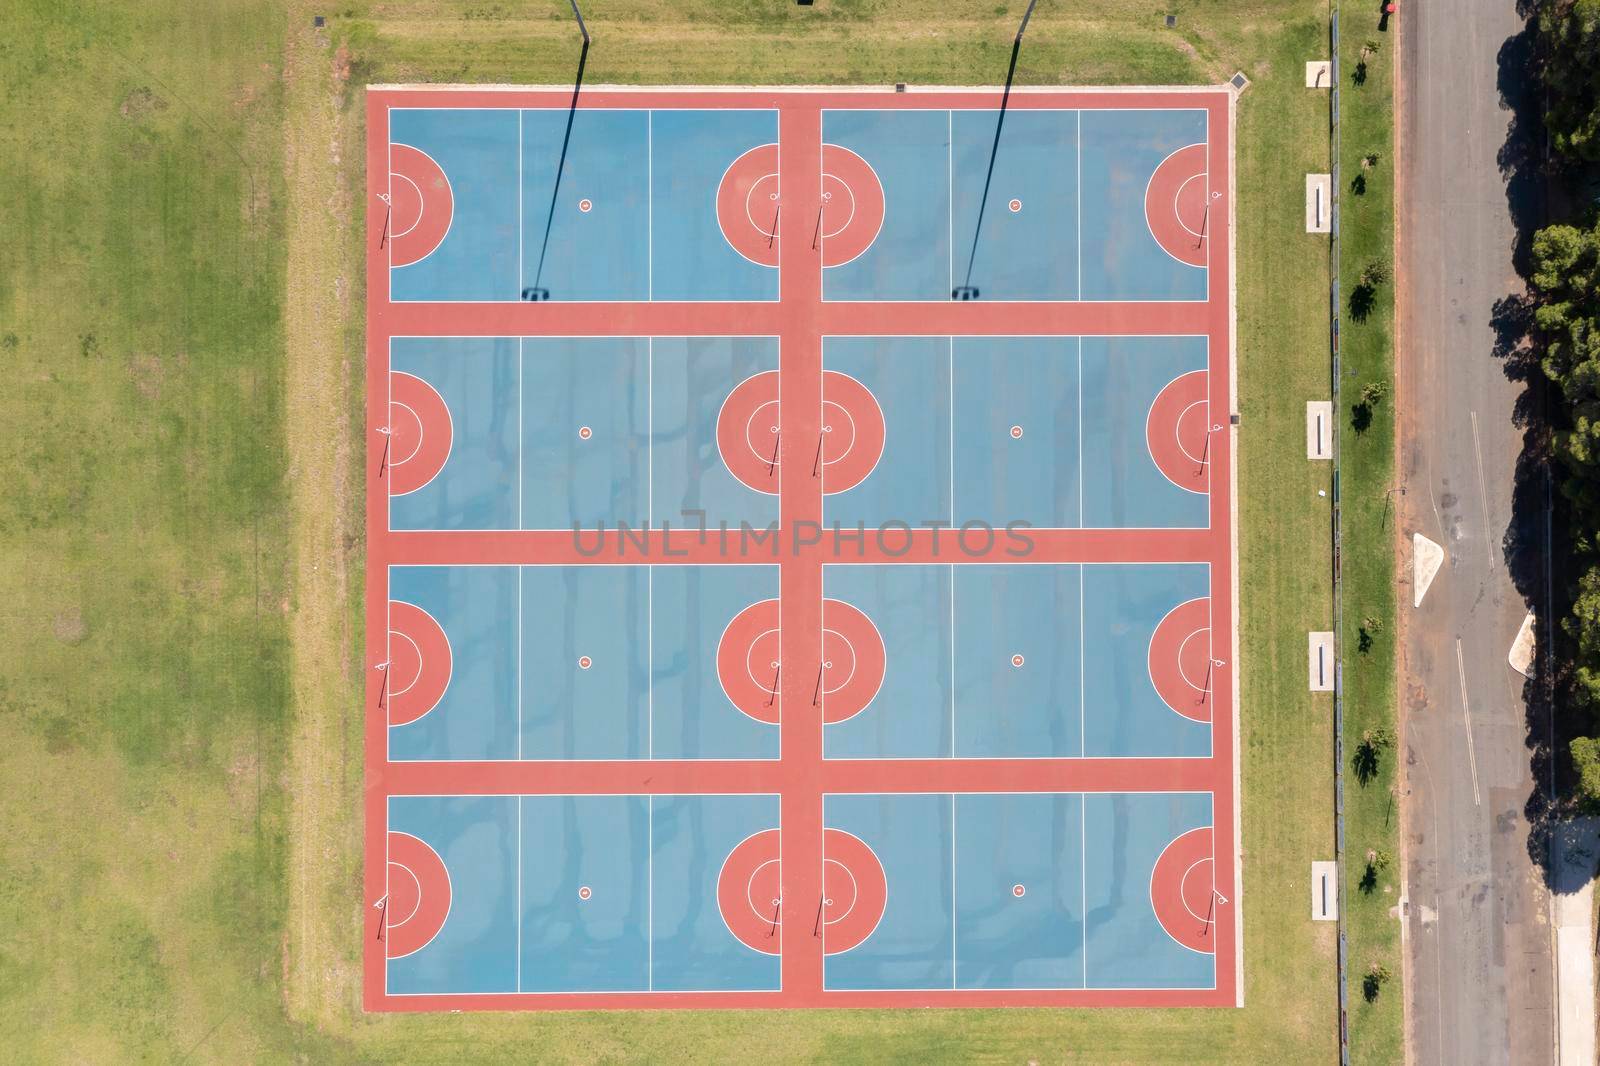 Drone aerial photograph of colourful netball courts and large sports fields in regional New South Wales in Australia